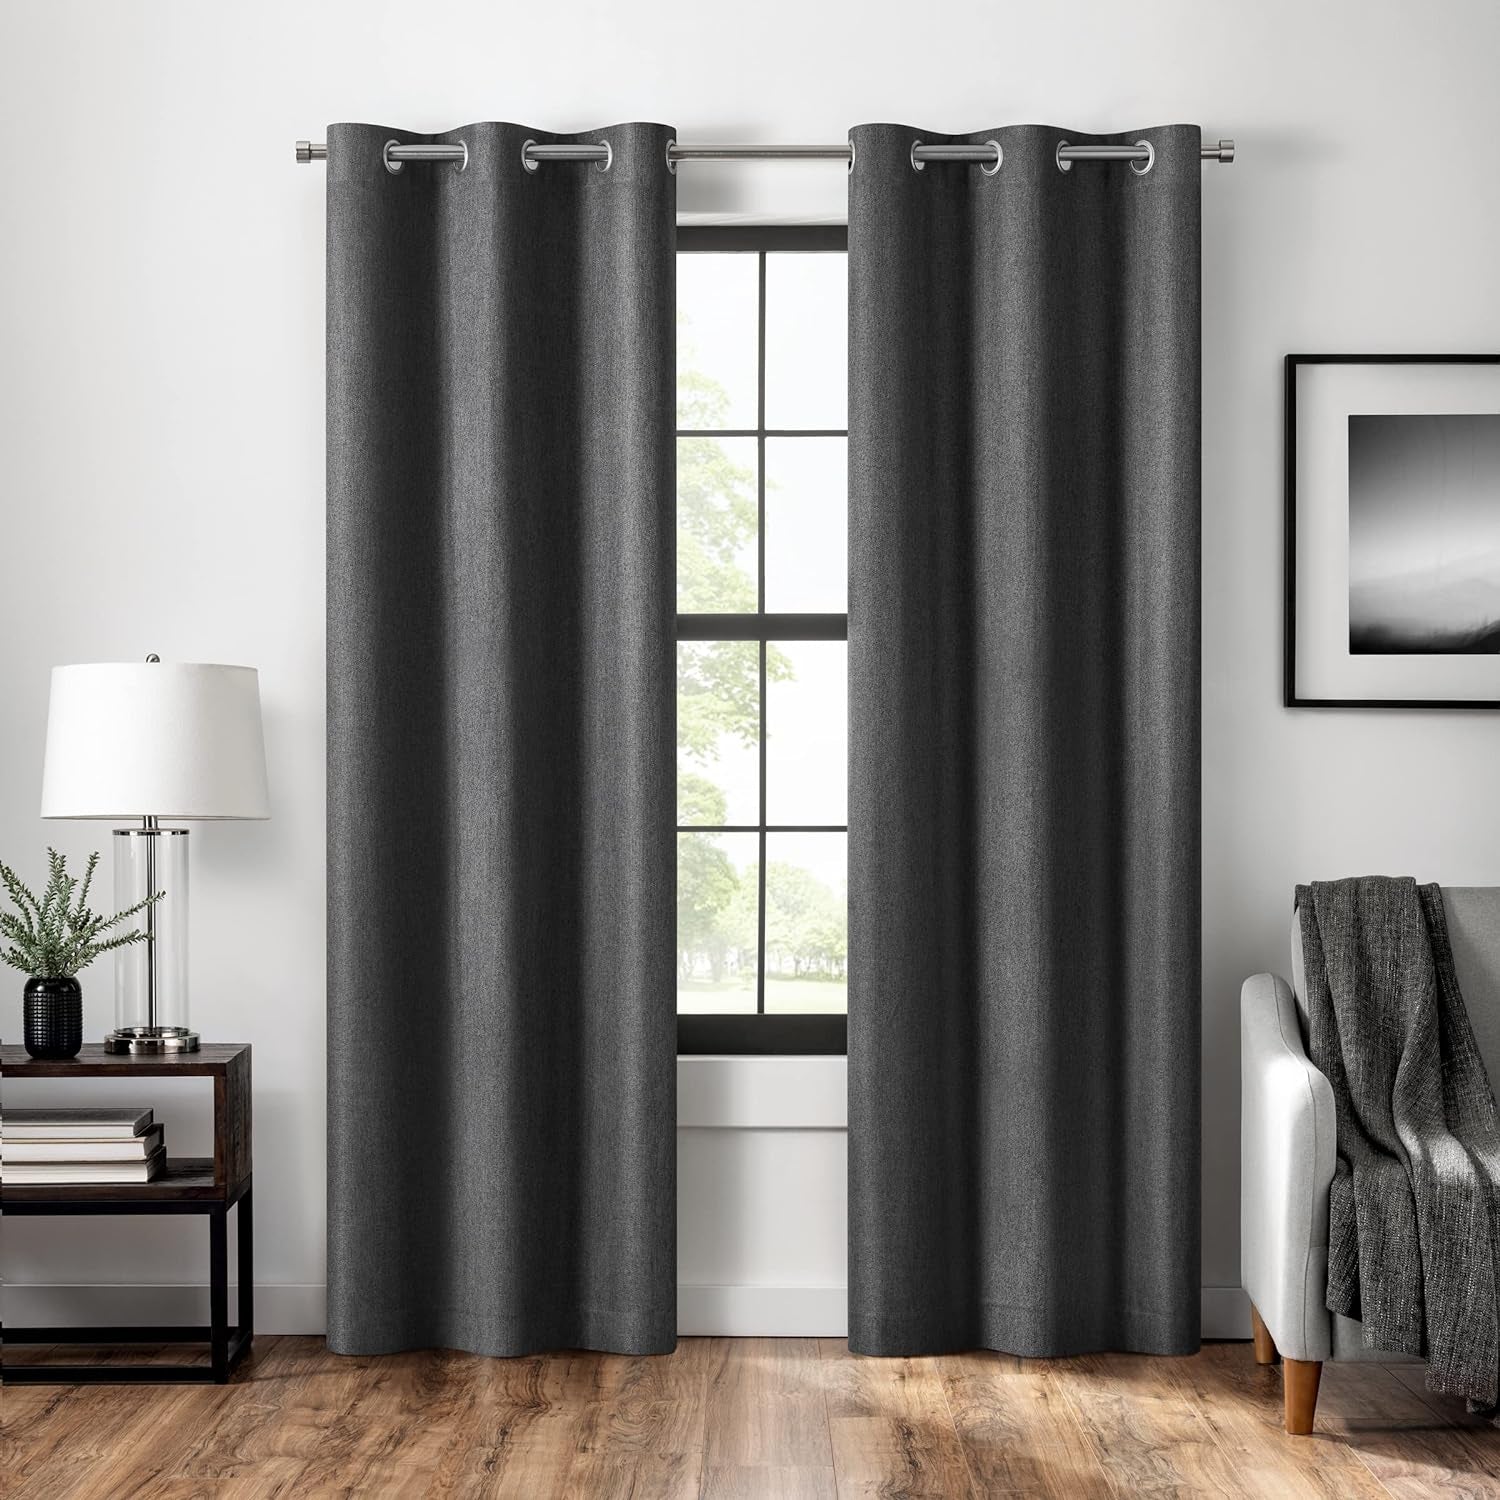 Eclipse Cannes Magnitech 100% Blackout Curtain, Rod Pocket Window Curtain Panel, Seamless Magnetic Closure for Bedroom, Living Room or Nursery, 63 in Long X 40 in Wide, (1 Panel), Natural/ Linen  KEECO Black Grommet 40X84